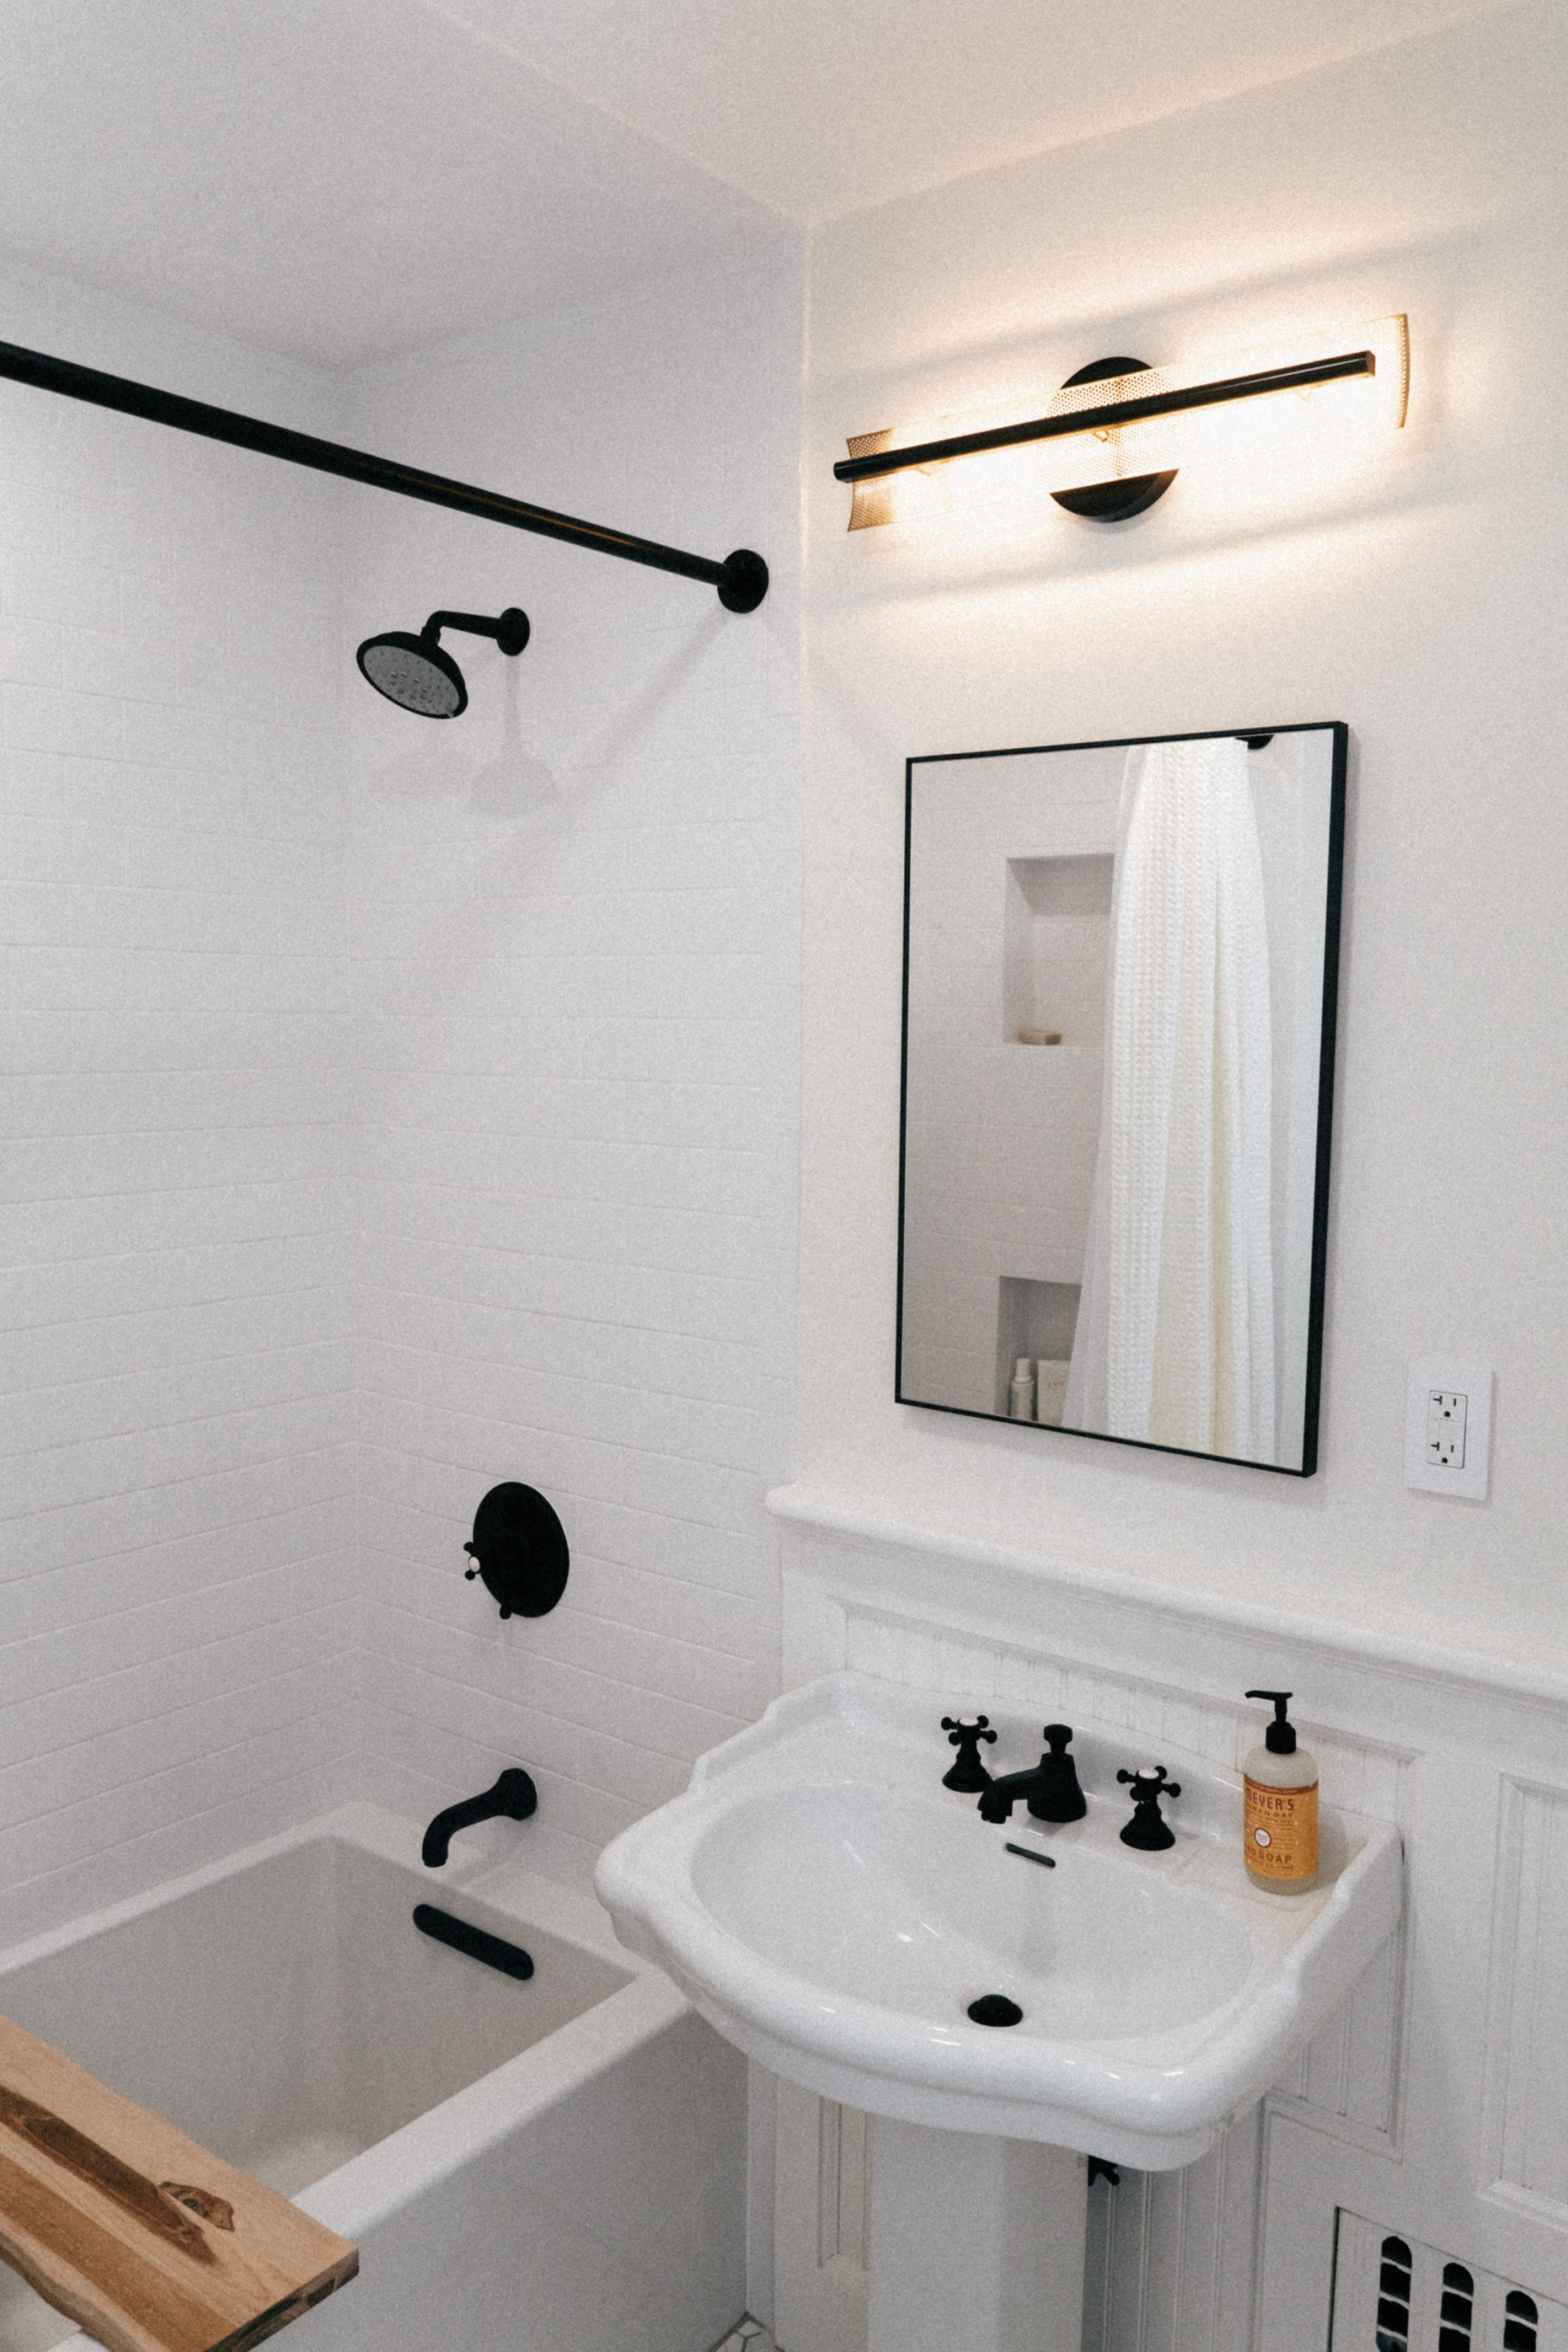 Simply by Simone - Simone Piliero - My Black and White Bathroom Renovation - Finished Photos - Bathtub and Shower - Sink - Sconce #bathroom #home #renovation #bathroomrenovation #diyhome #bathroomtiles #bathroomdecor #bathroomideas #bathroomrenovationideas